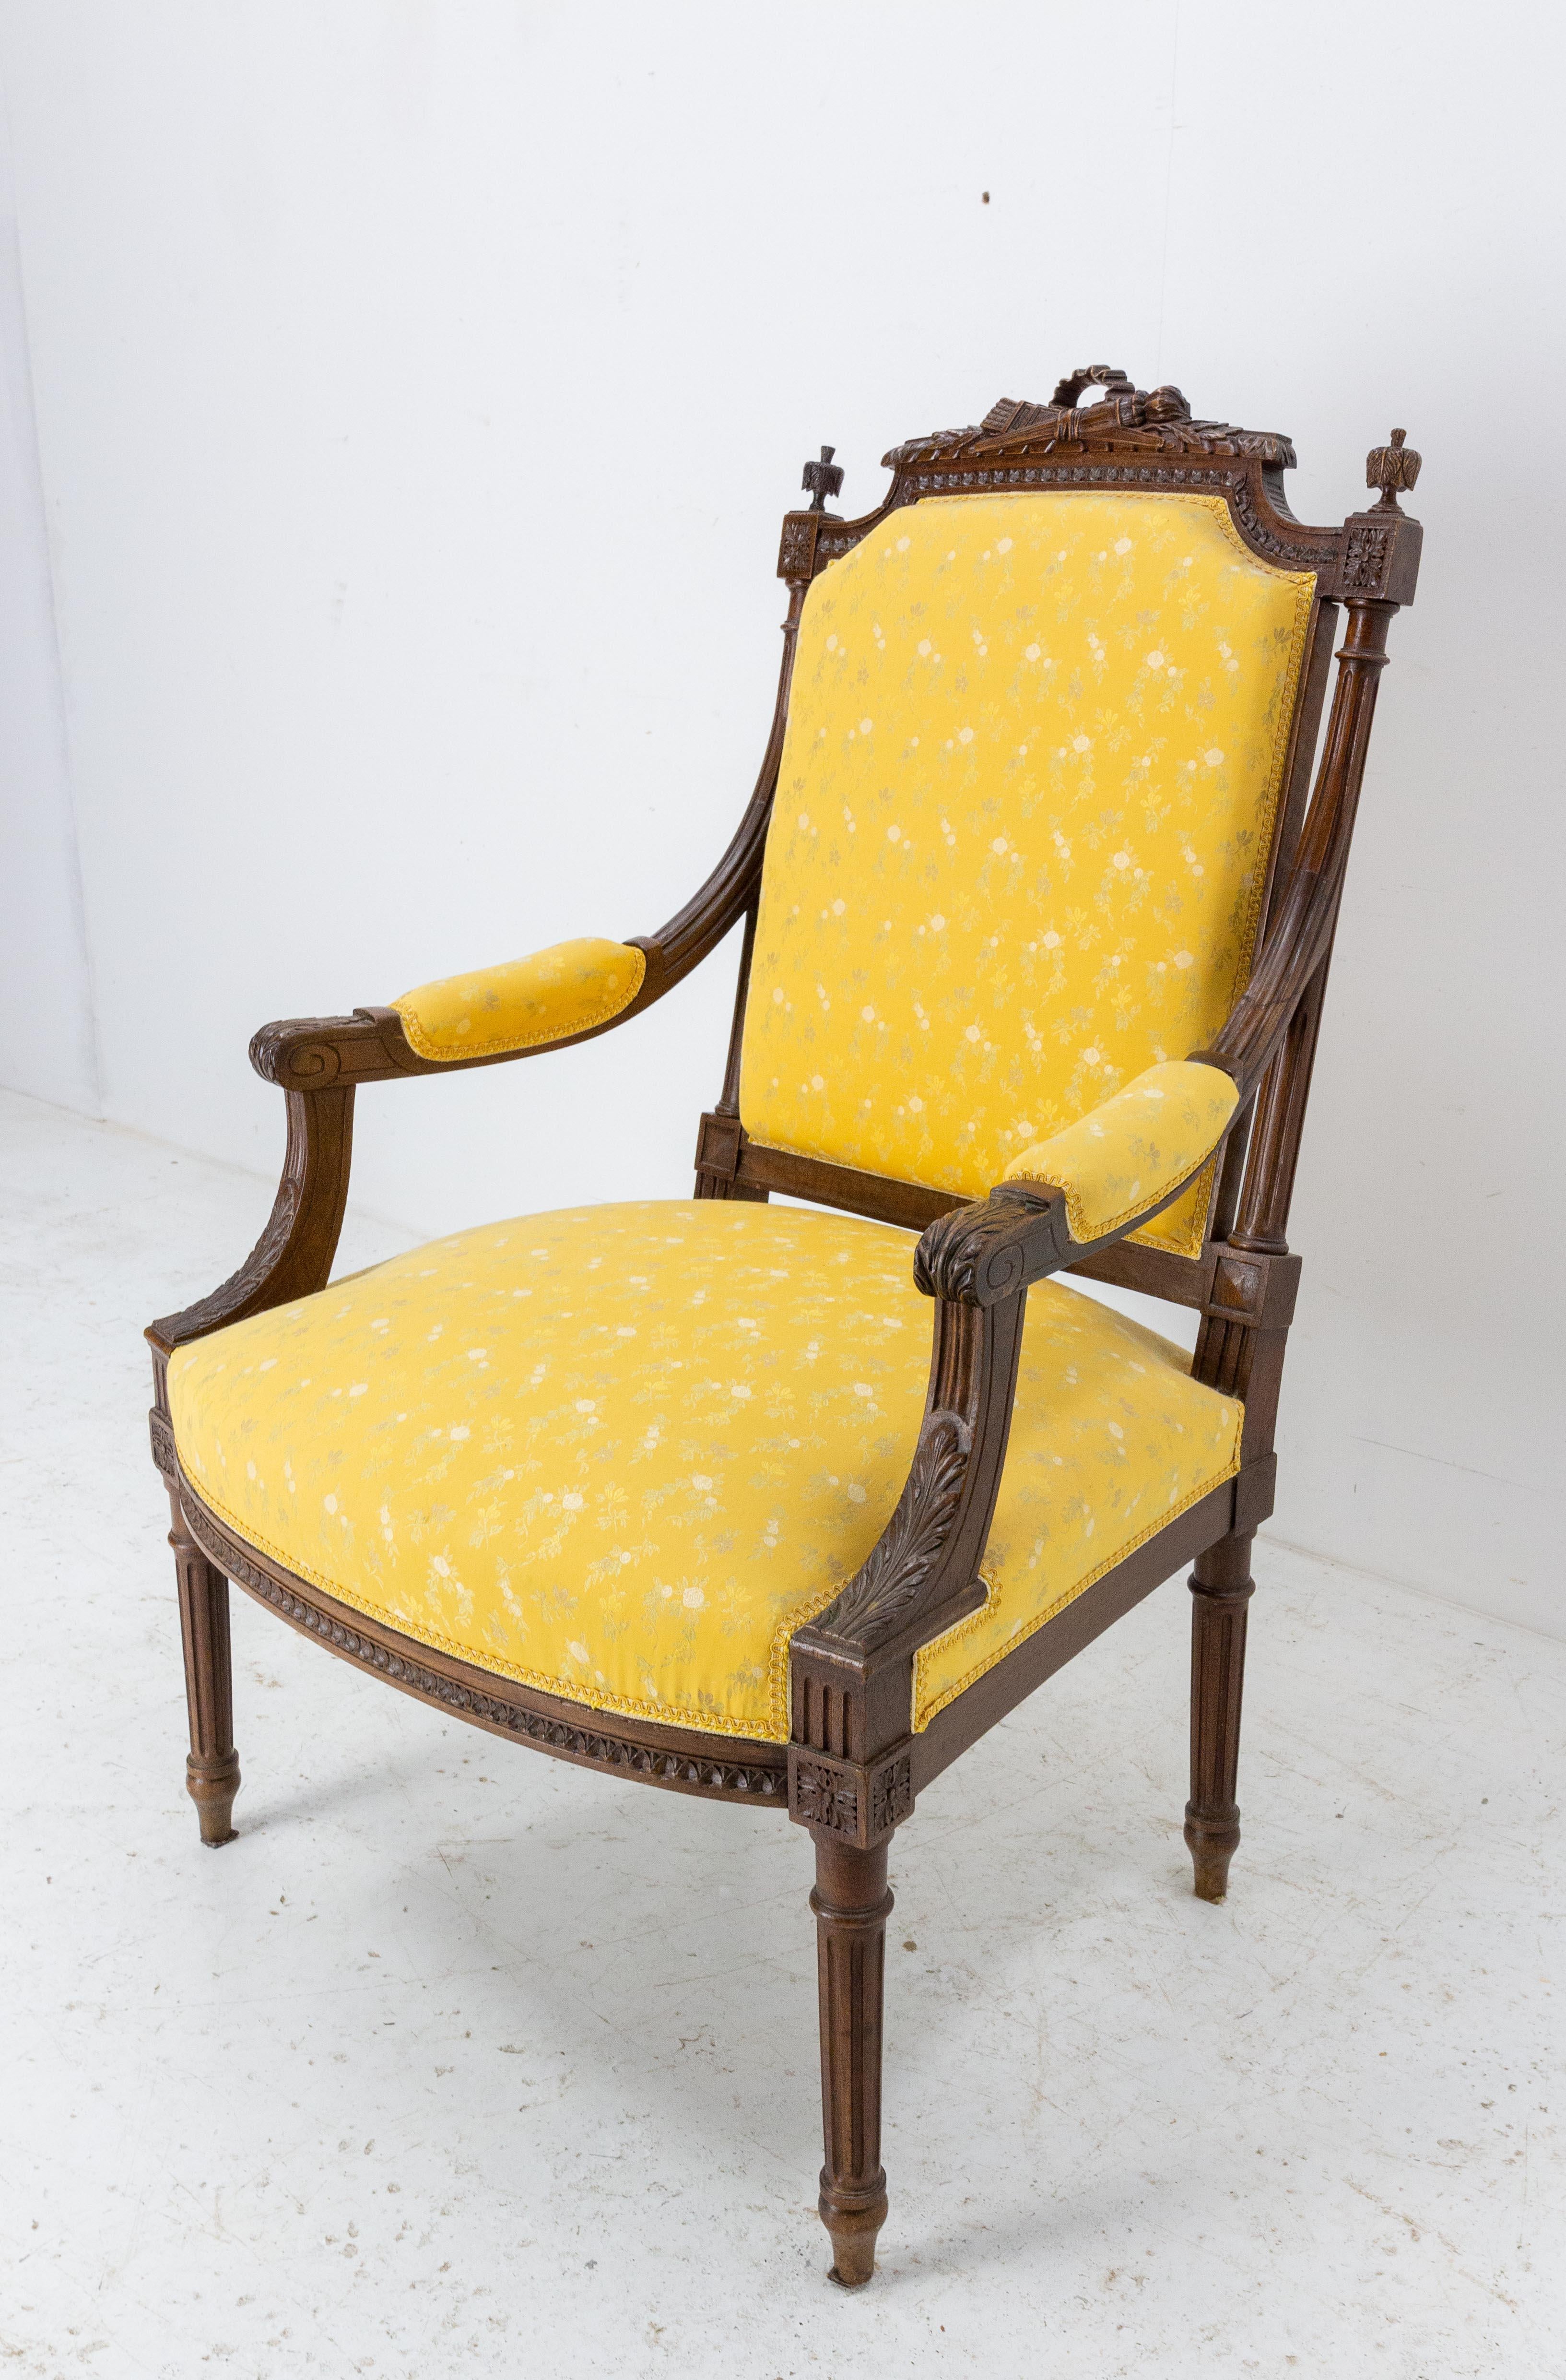 Walnut Fauteuil Louis XVI Revival Armchair French, Late 19th Century to Recover In Good Condition For Sale In Labrit, Landes